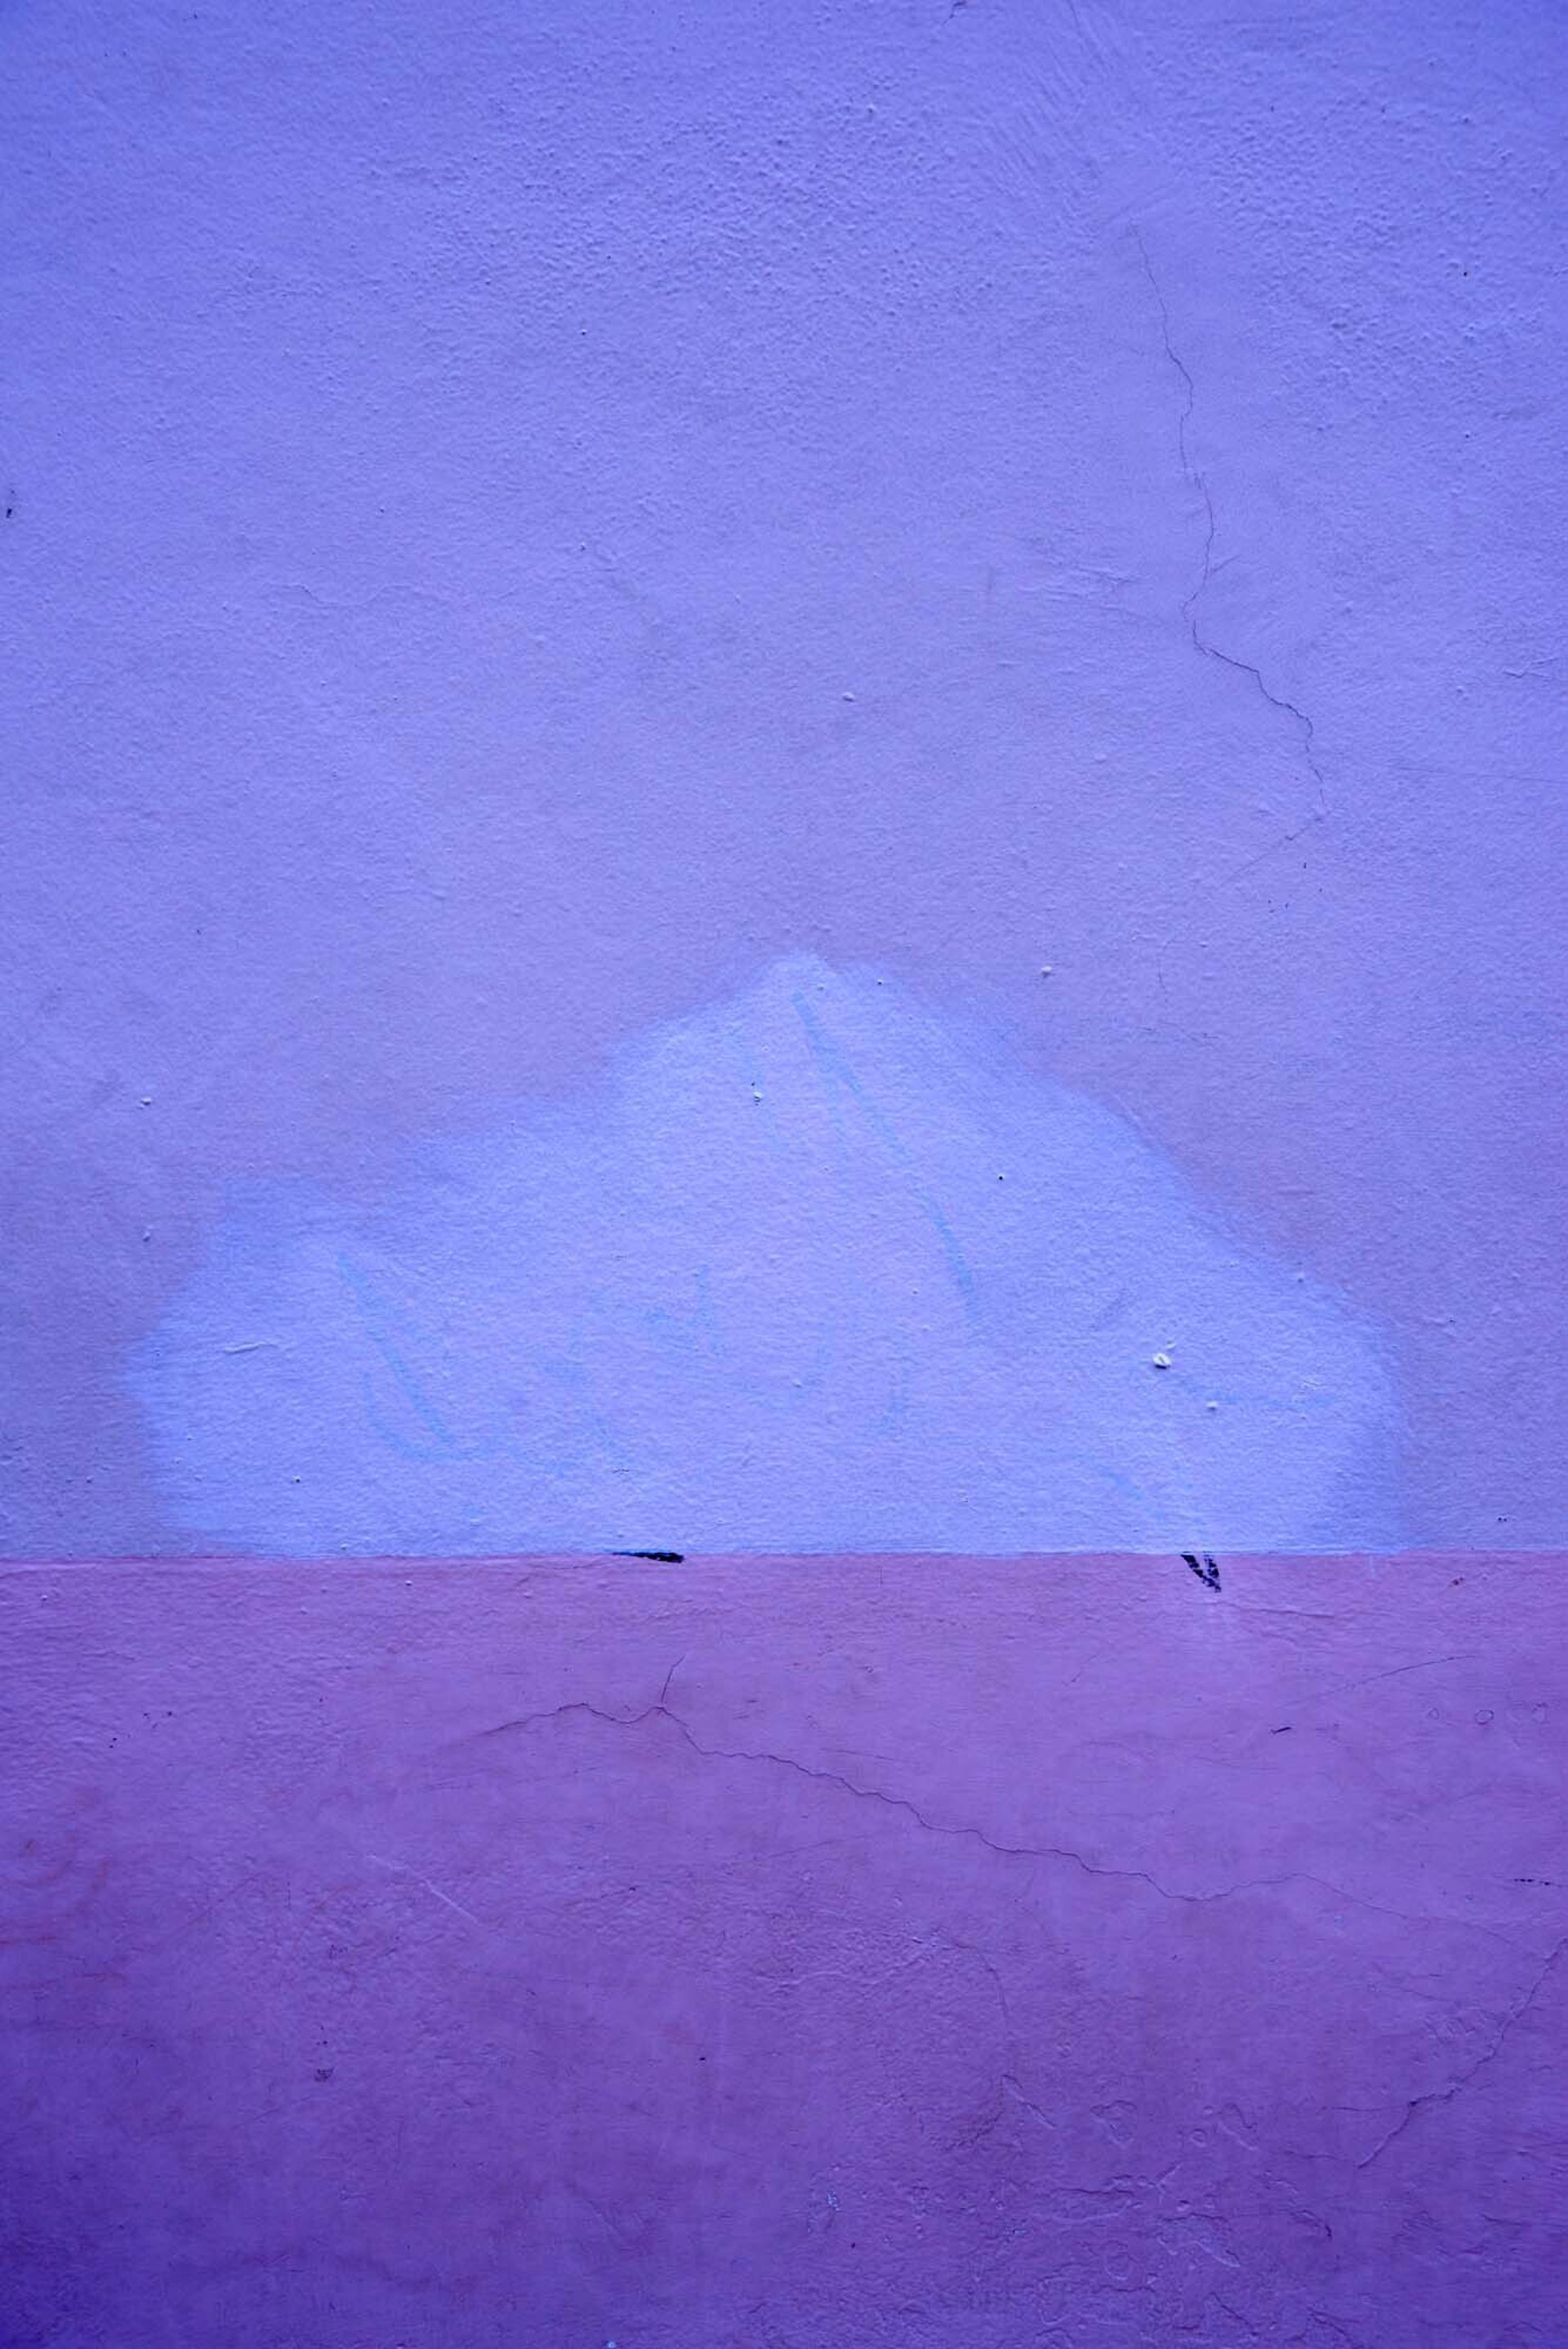 Finding the Universe in Oaxaca, Blue Triangle on Purple Ground by Gary Goldberg